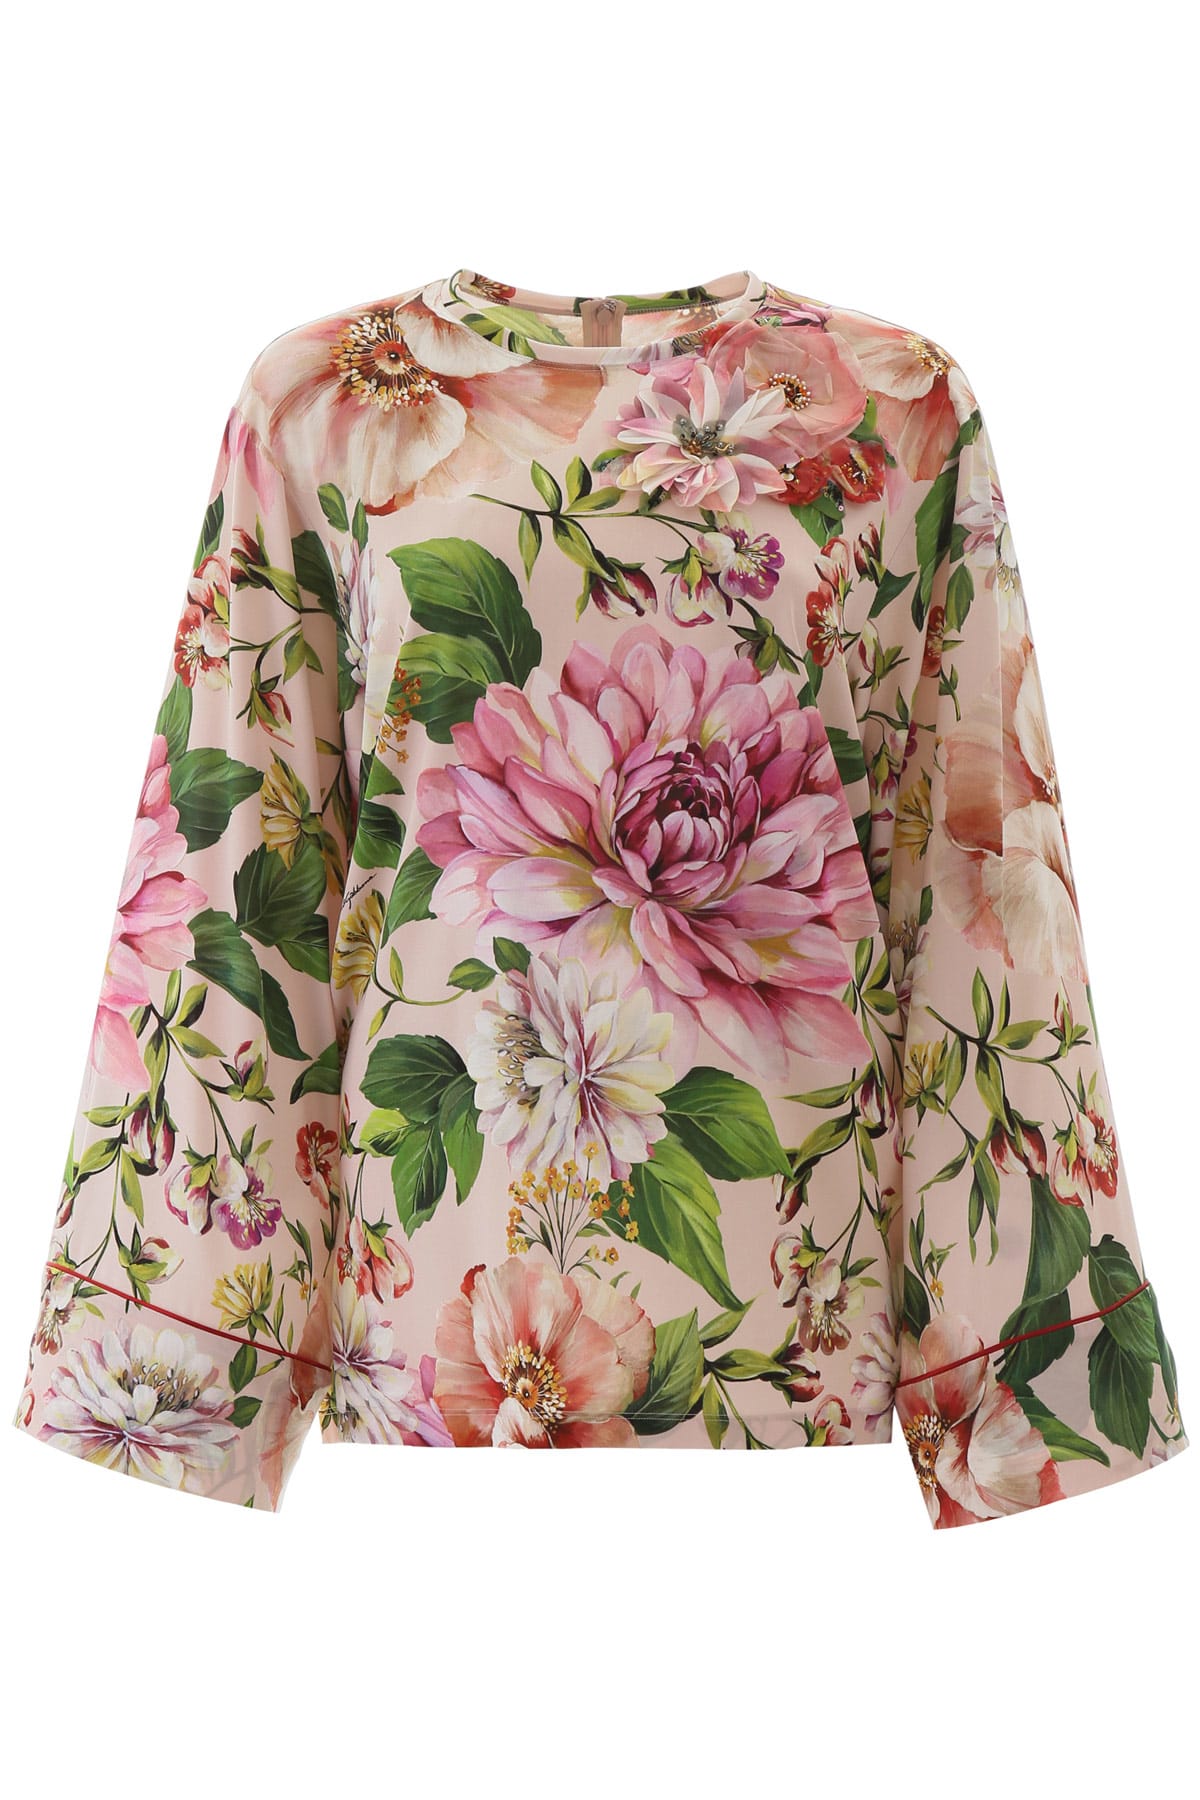 DOLCE & GABBANA FLORAL-PRINTED BLOUSE,11251048